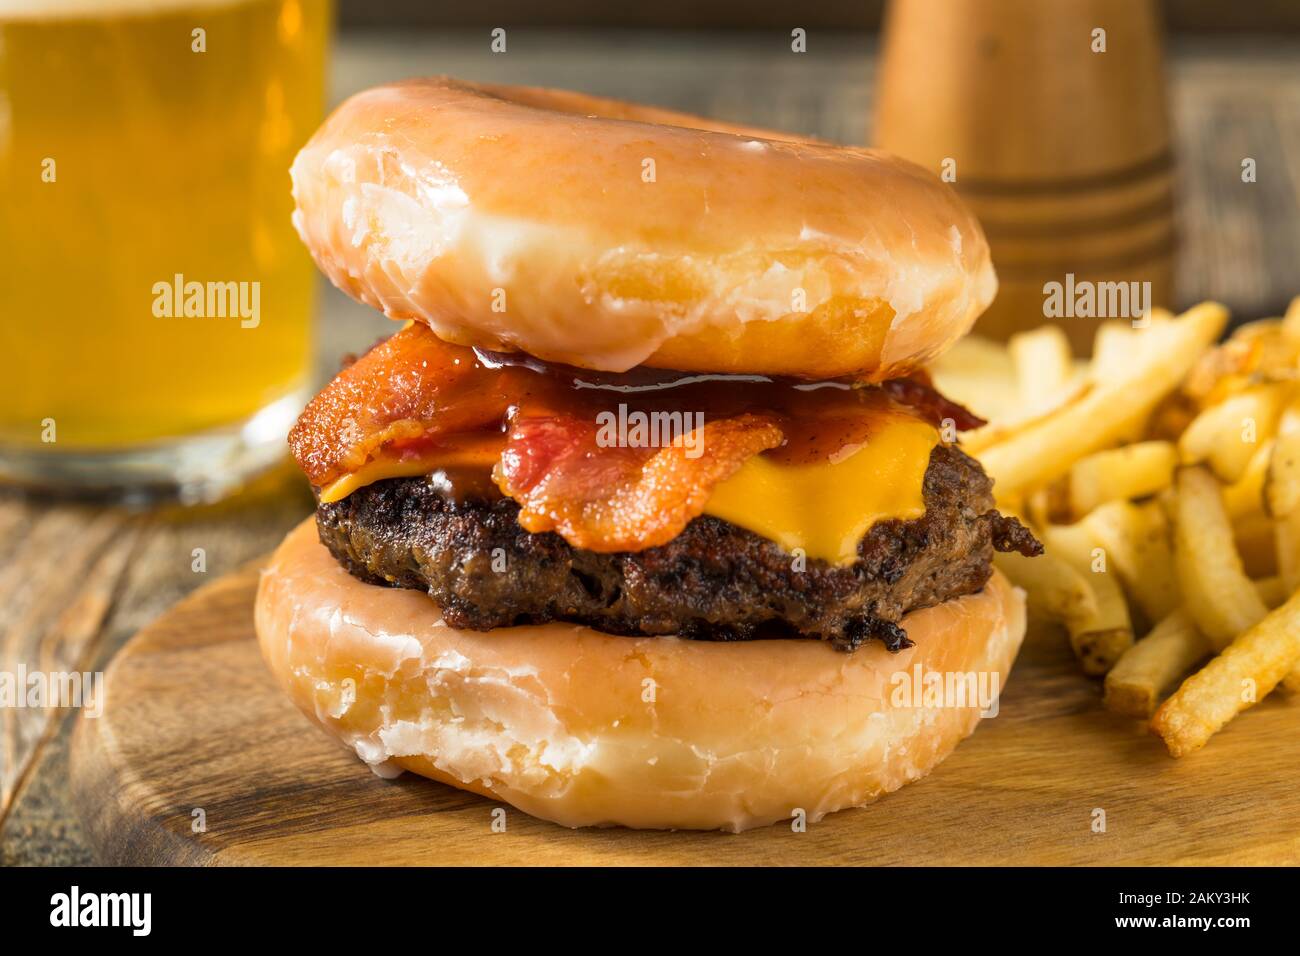 Homemade Donut Cheeseburger with Fries and Beer Stock Photo